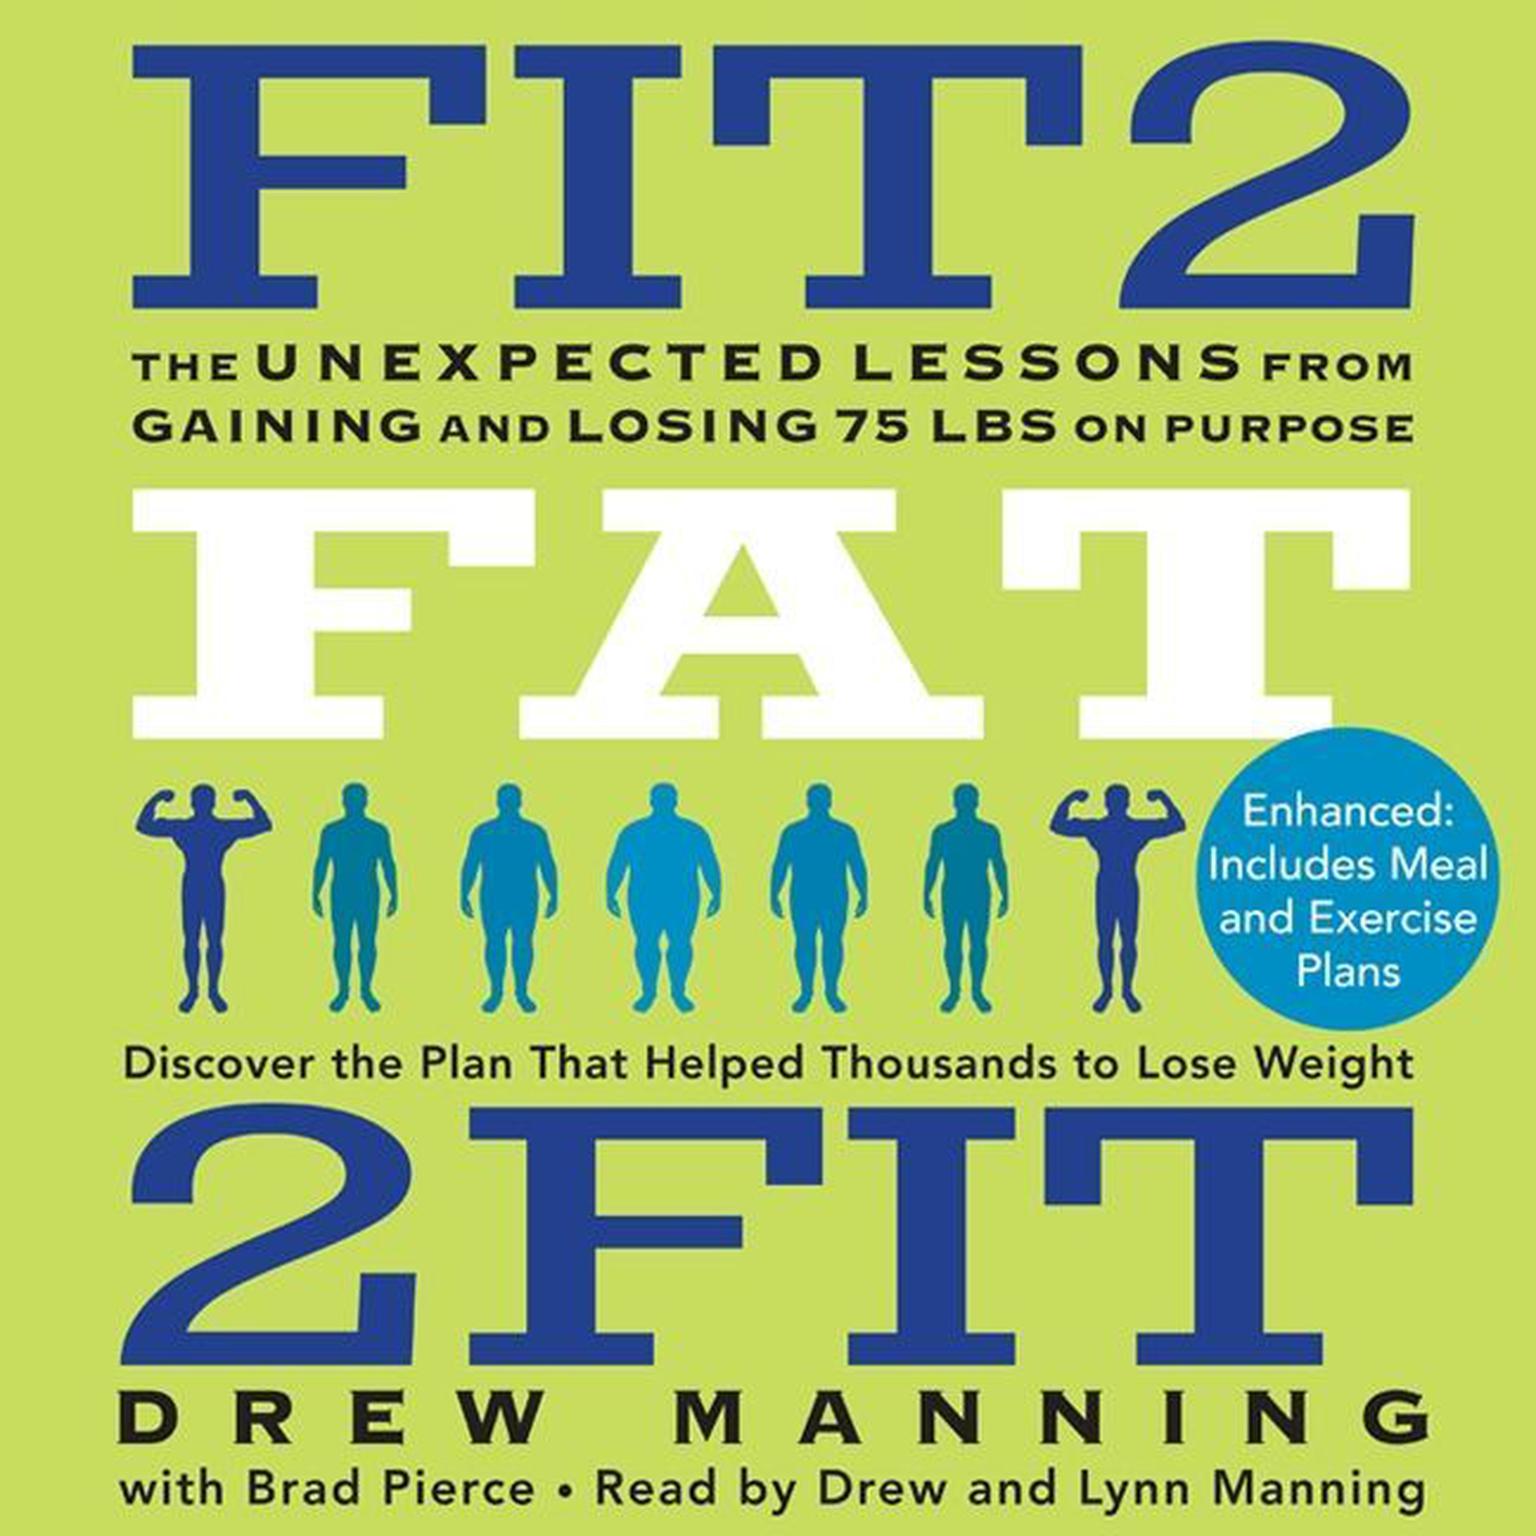 Fit2Fat2Fit: The Unexpected Lessons from Gaining and Losing 75 lbs on Purpose Audiobook, by Drew Manning